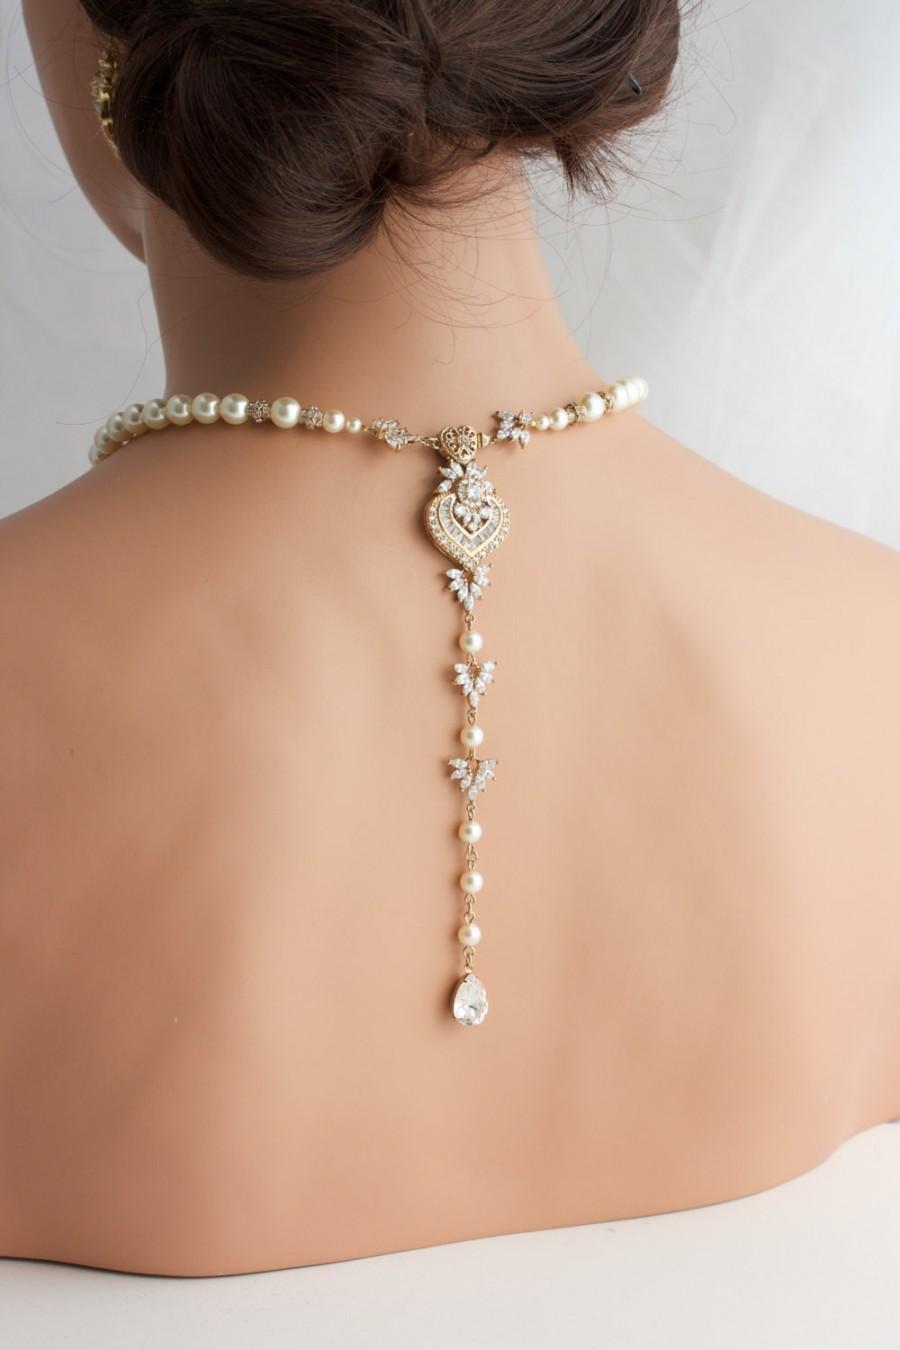 Mariage - Wedding Jewelry Gold Backdrop Necklace Long Back Drop Bridal Necklace Pearl Crystal Wedding Necklace EVIE